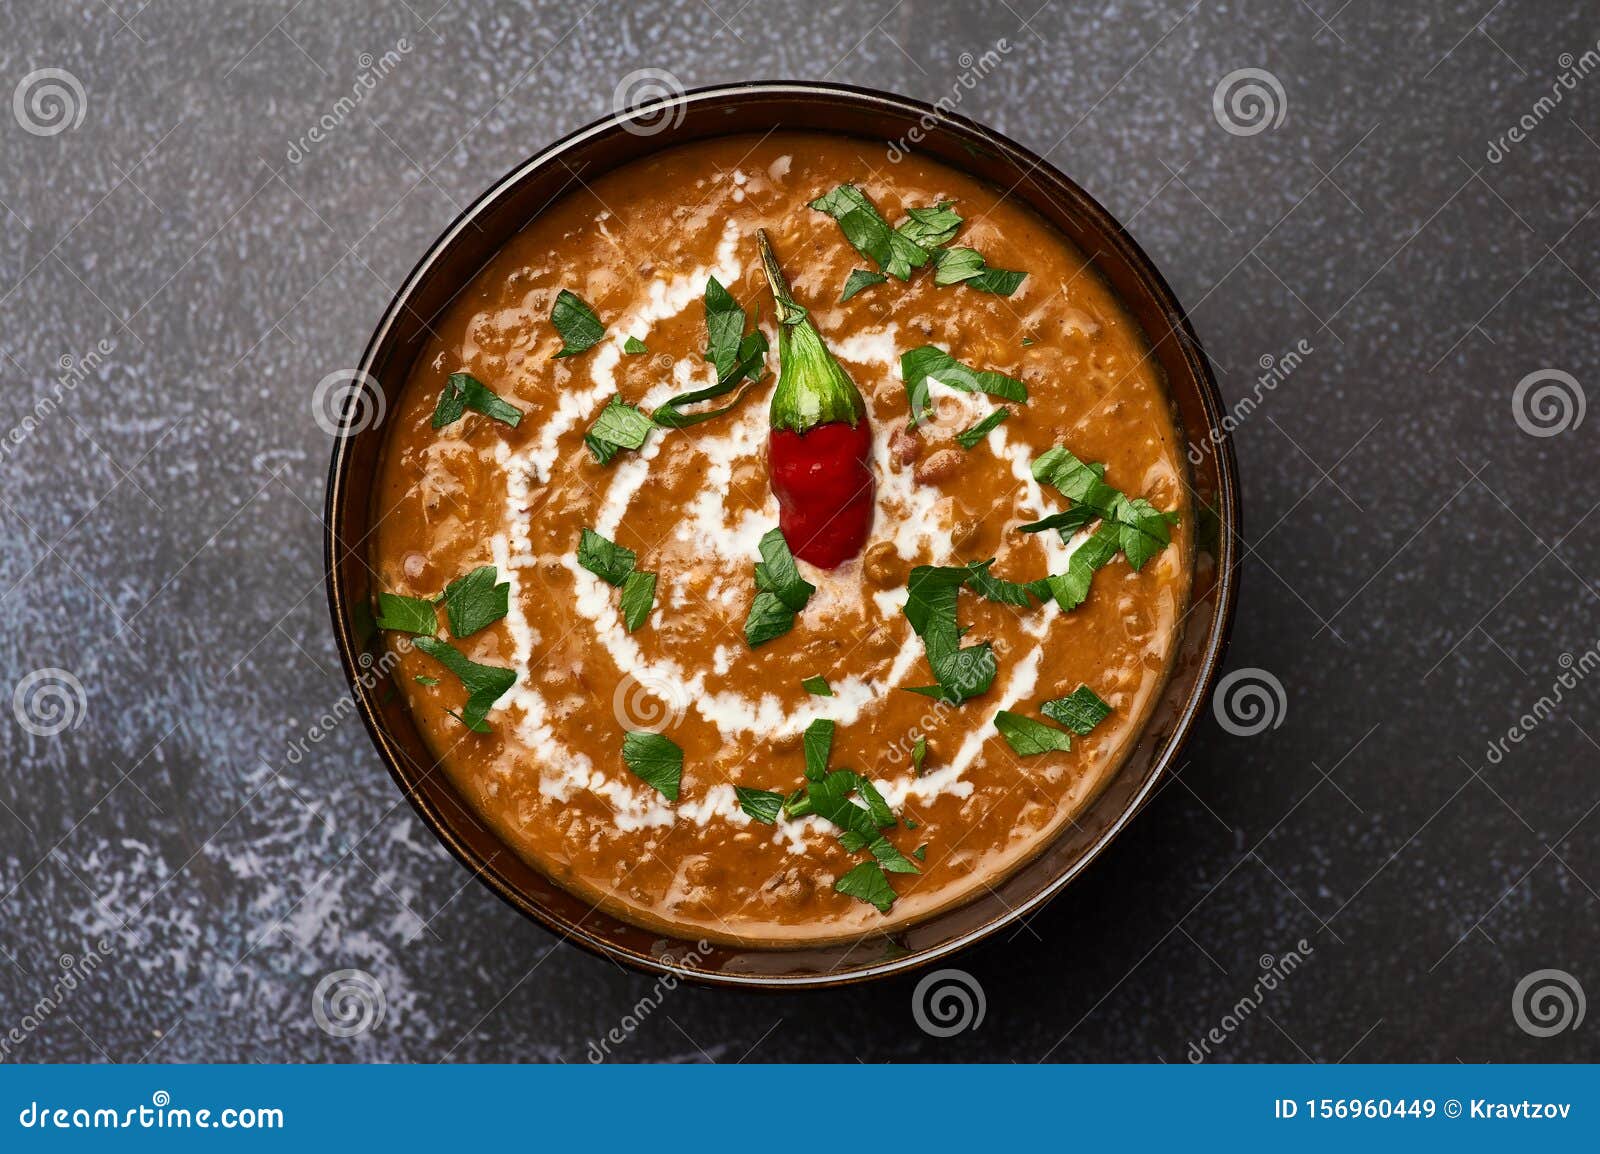 dal makhani at dark background. dal makhani - traditional indian cuisine puree dish with urad beans, red beans, butter, spices and